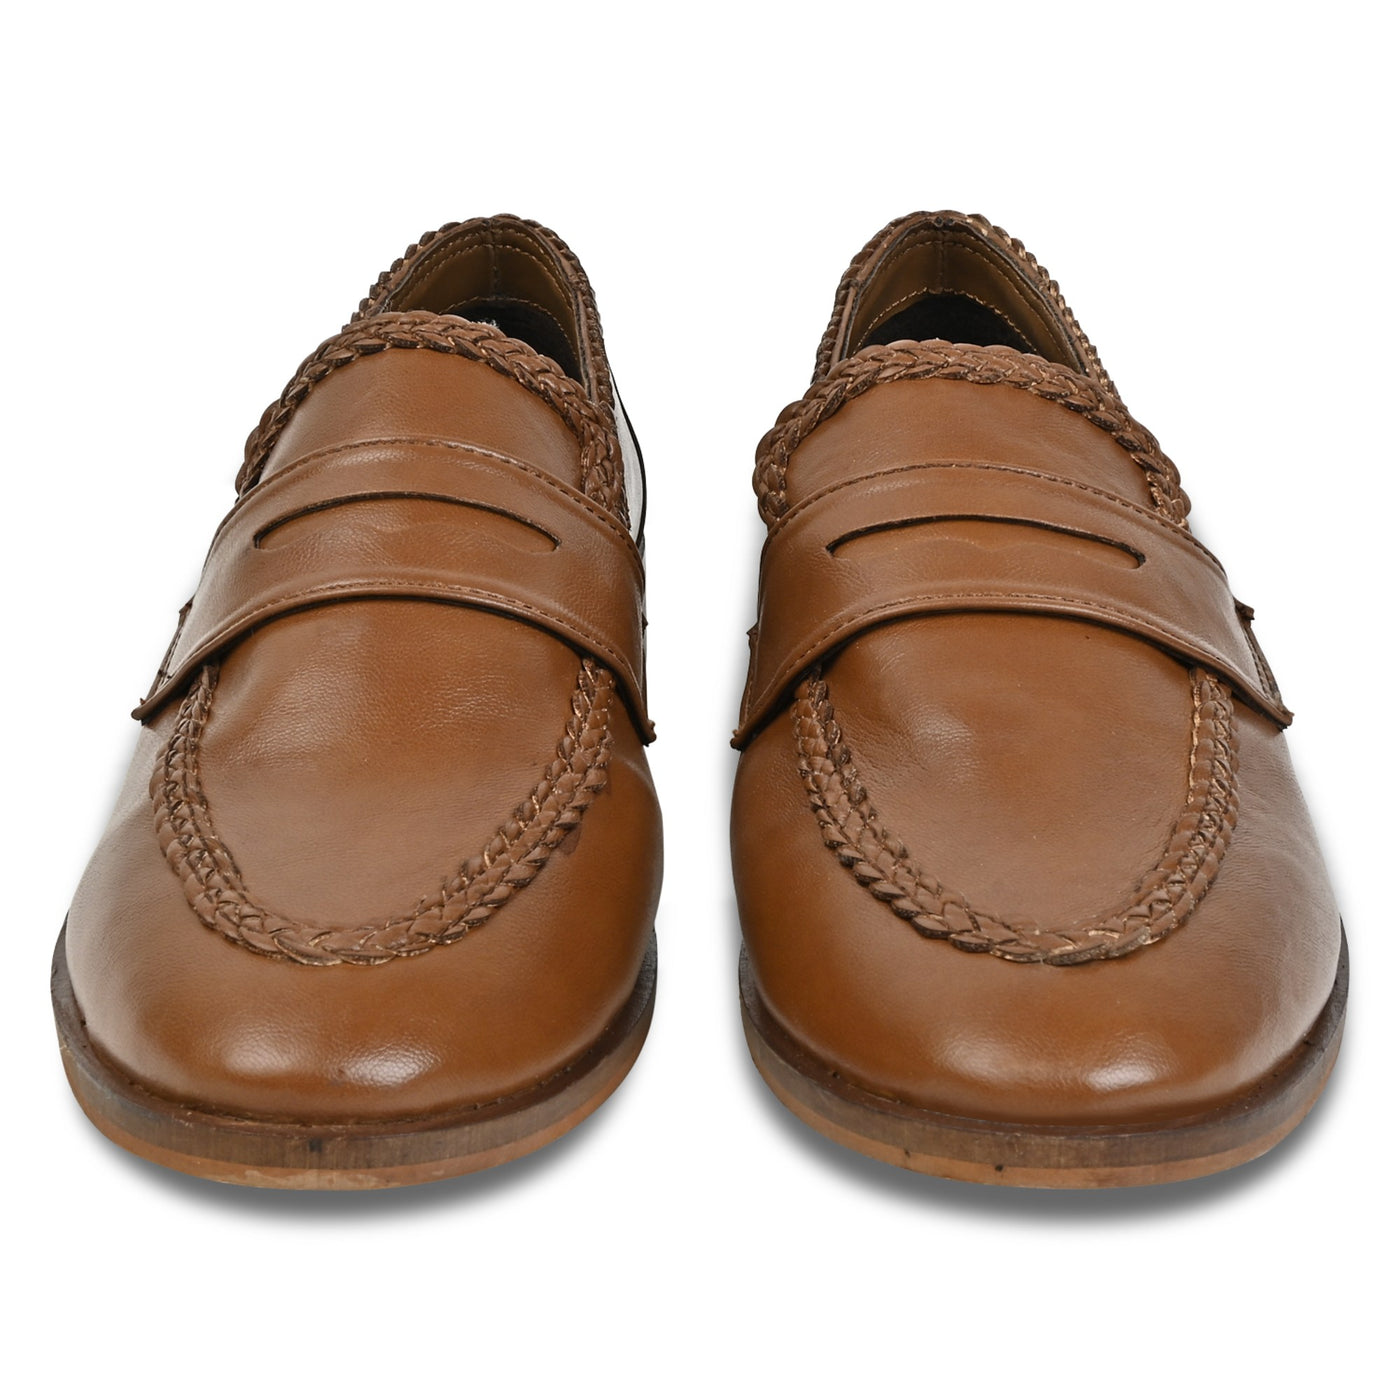 Braided Patina Loafer- Tan